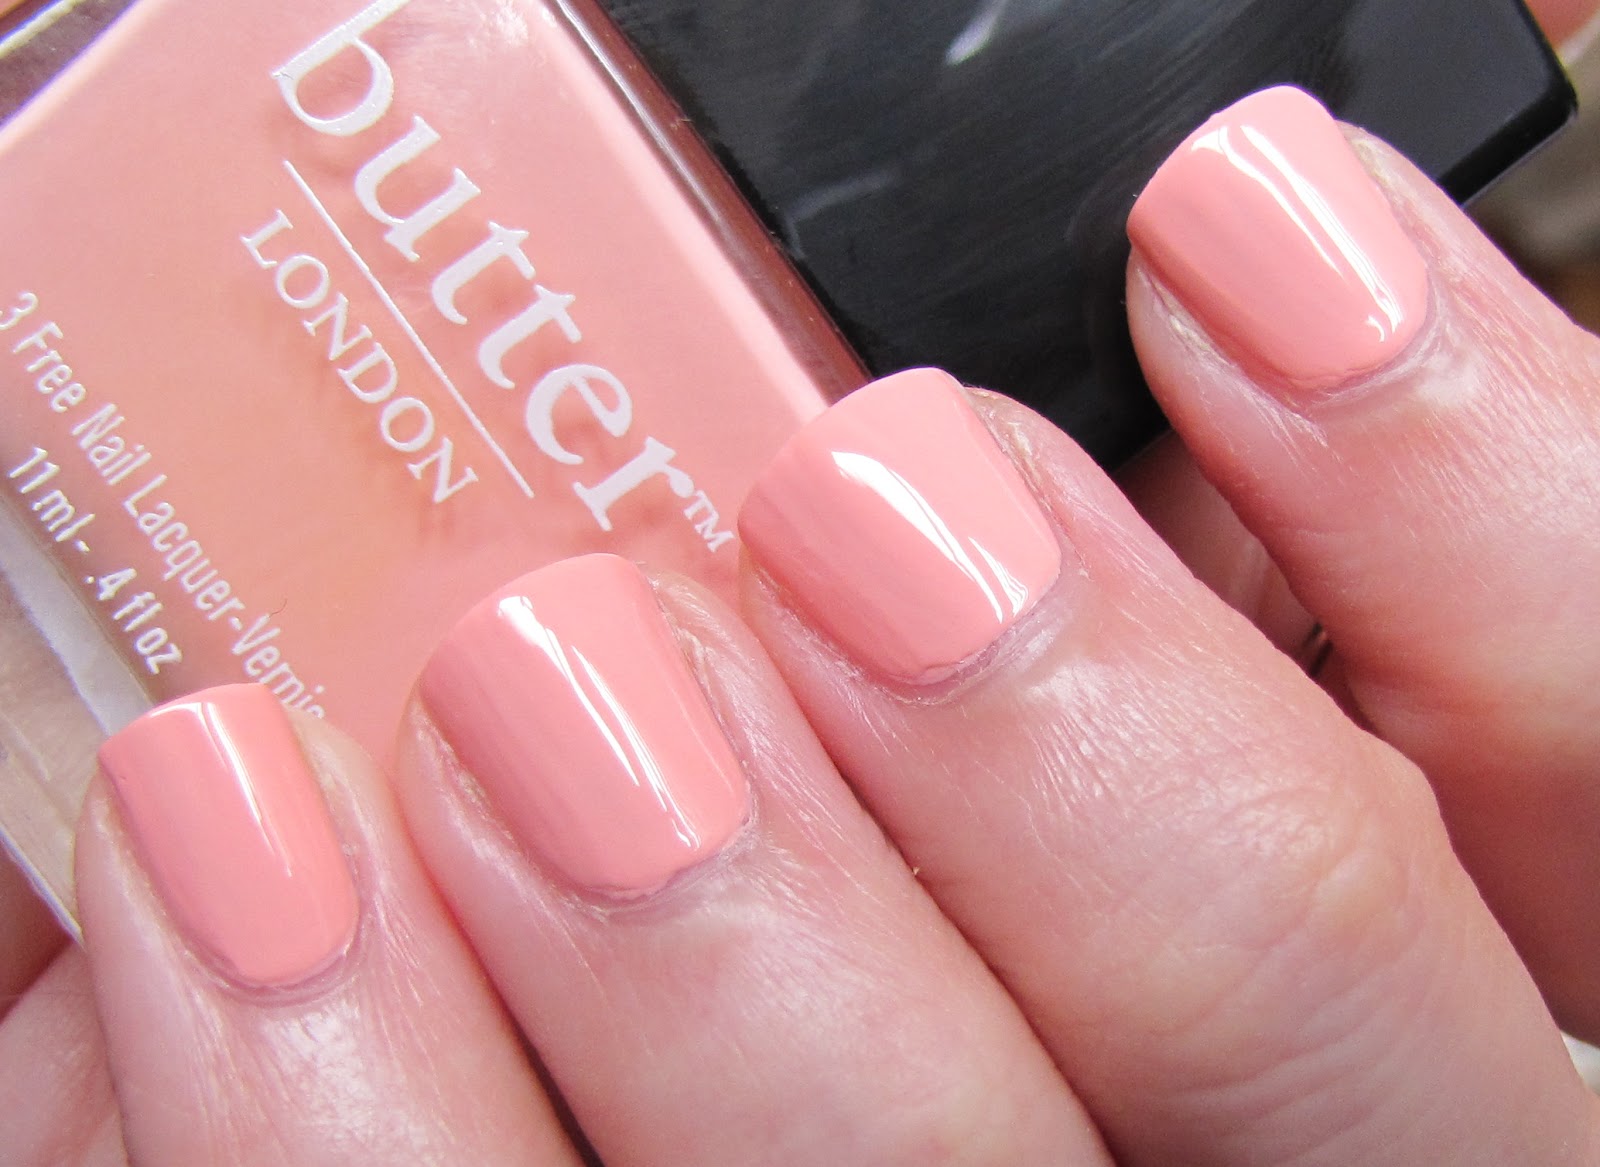 9. Butter London Nail Lacquer in "Fiver" - wide 6